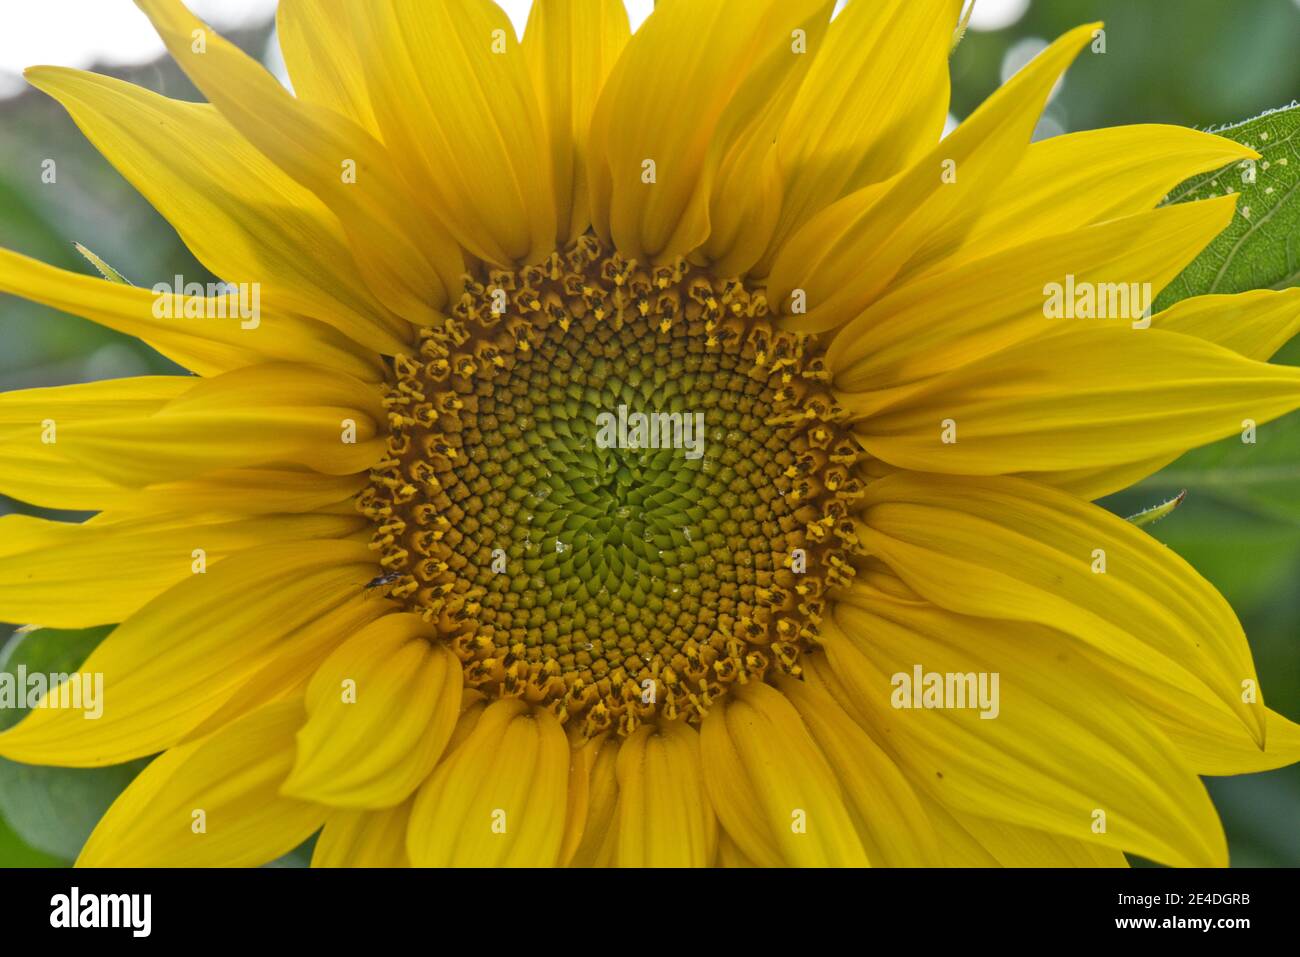 Sunflower (Helianthus annuus) flower or pseudoanthium consisting of petal-like sterile ray flowers and inner disc flowers that develop into seeds. Stock Photo